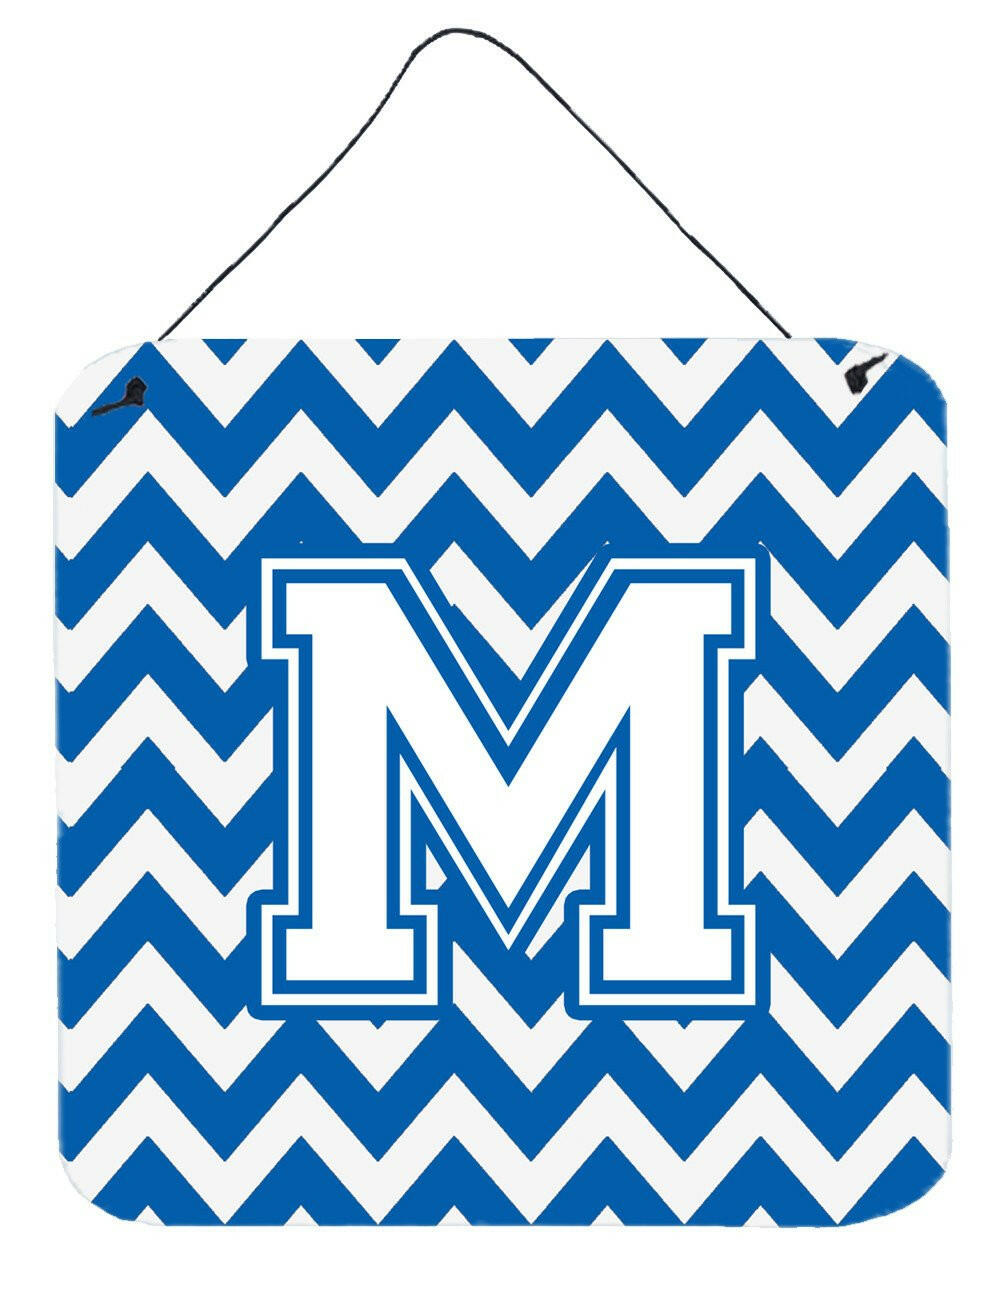 Letter M Chevron Blue and White Wall or Door Hanging Prints CJ1045-MDS66 by Caroline's Treasures